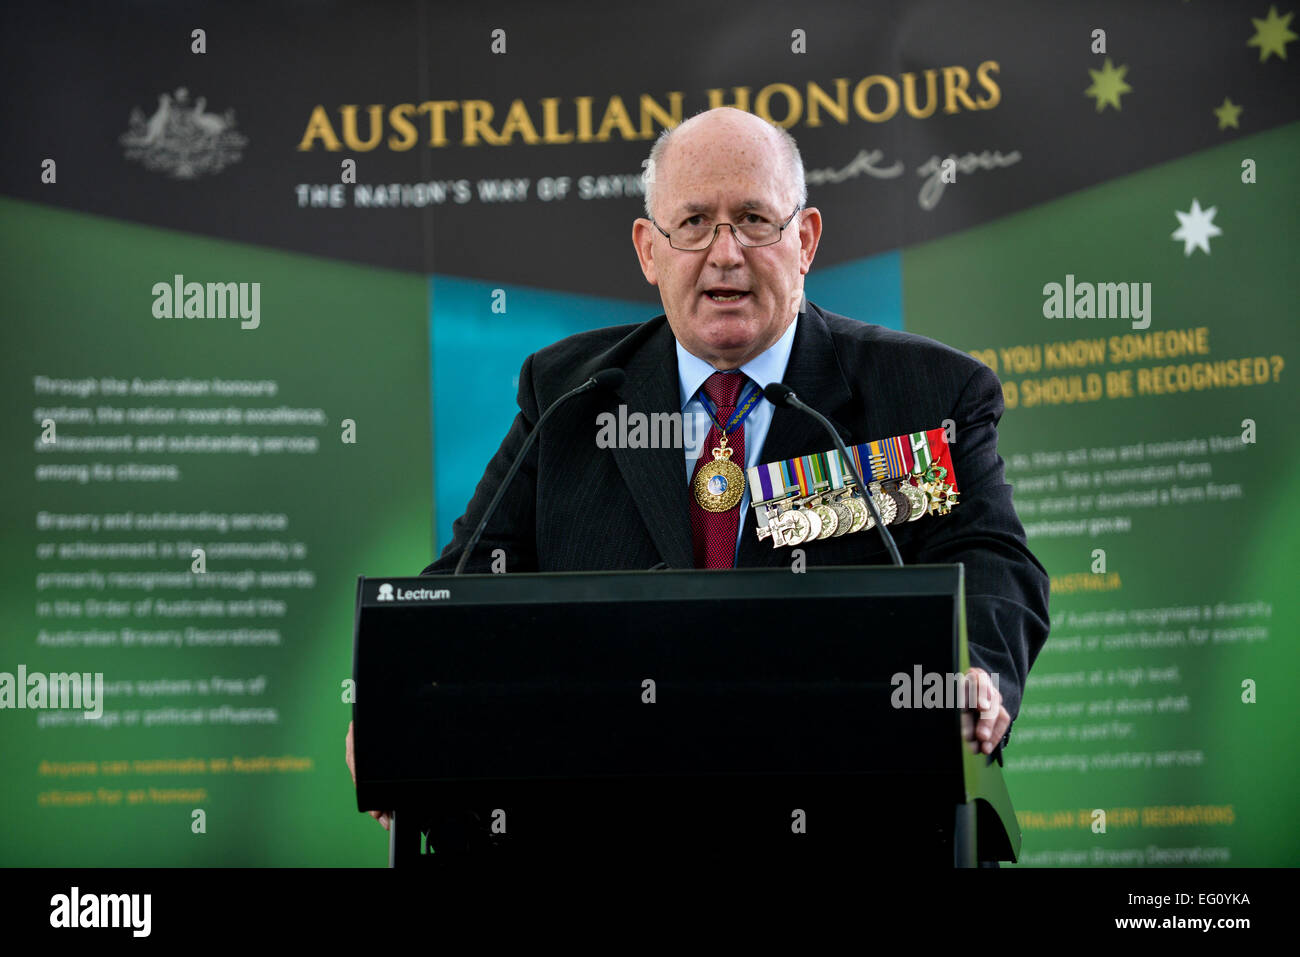 Canberra, Australia. 13th Feb, 2015. Australian Governor-General Peter Cosgrove speaks at the ceremony to mark the 40th anniversary of Australian Honours system at the Government House in Canberra, Australia, Feb. 13, 2015. © Justin Qian/Xinhua/Alamy Live News Stock Photo